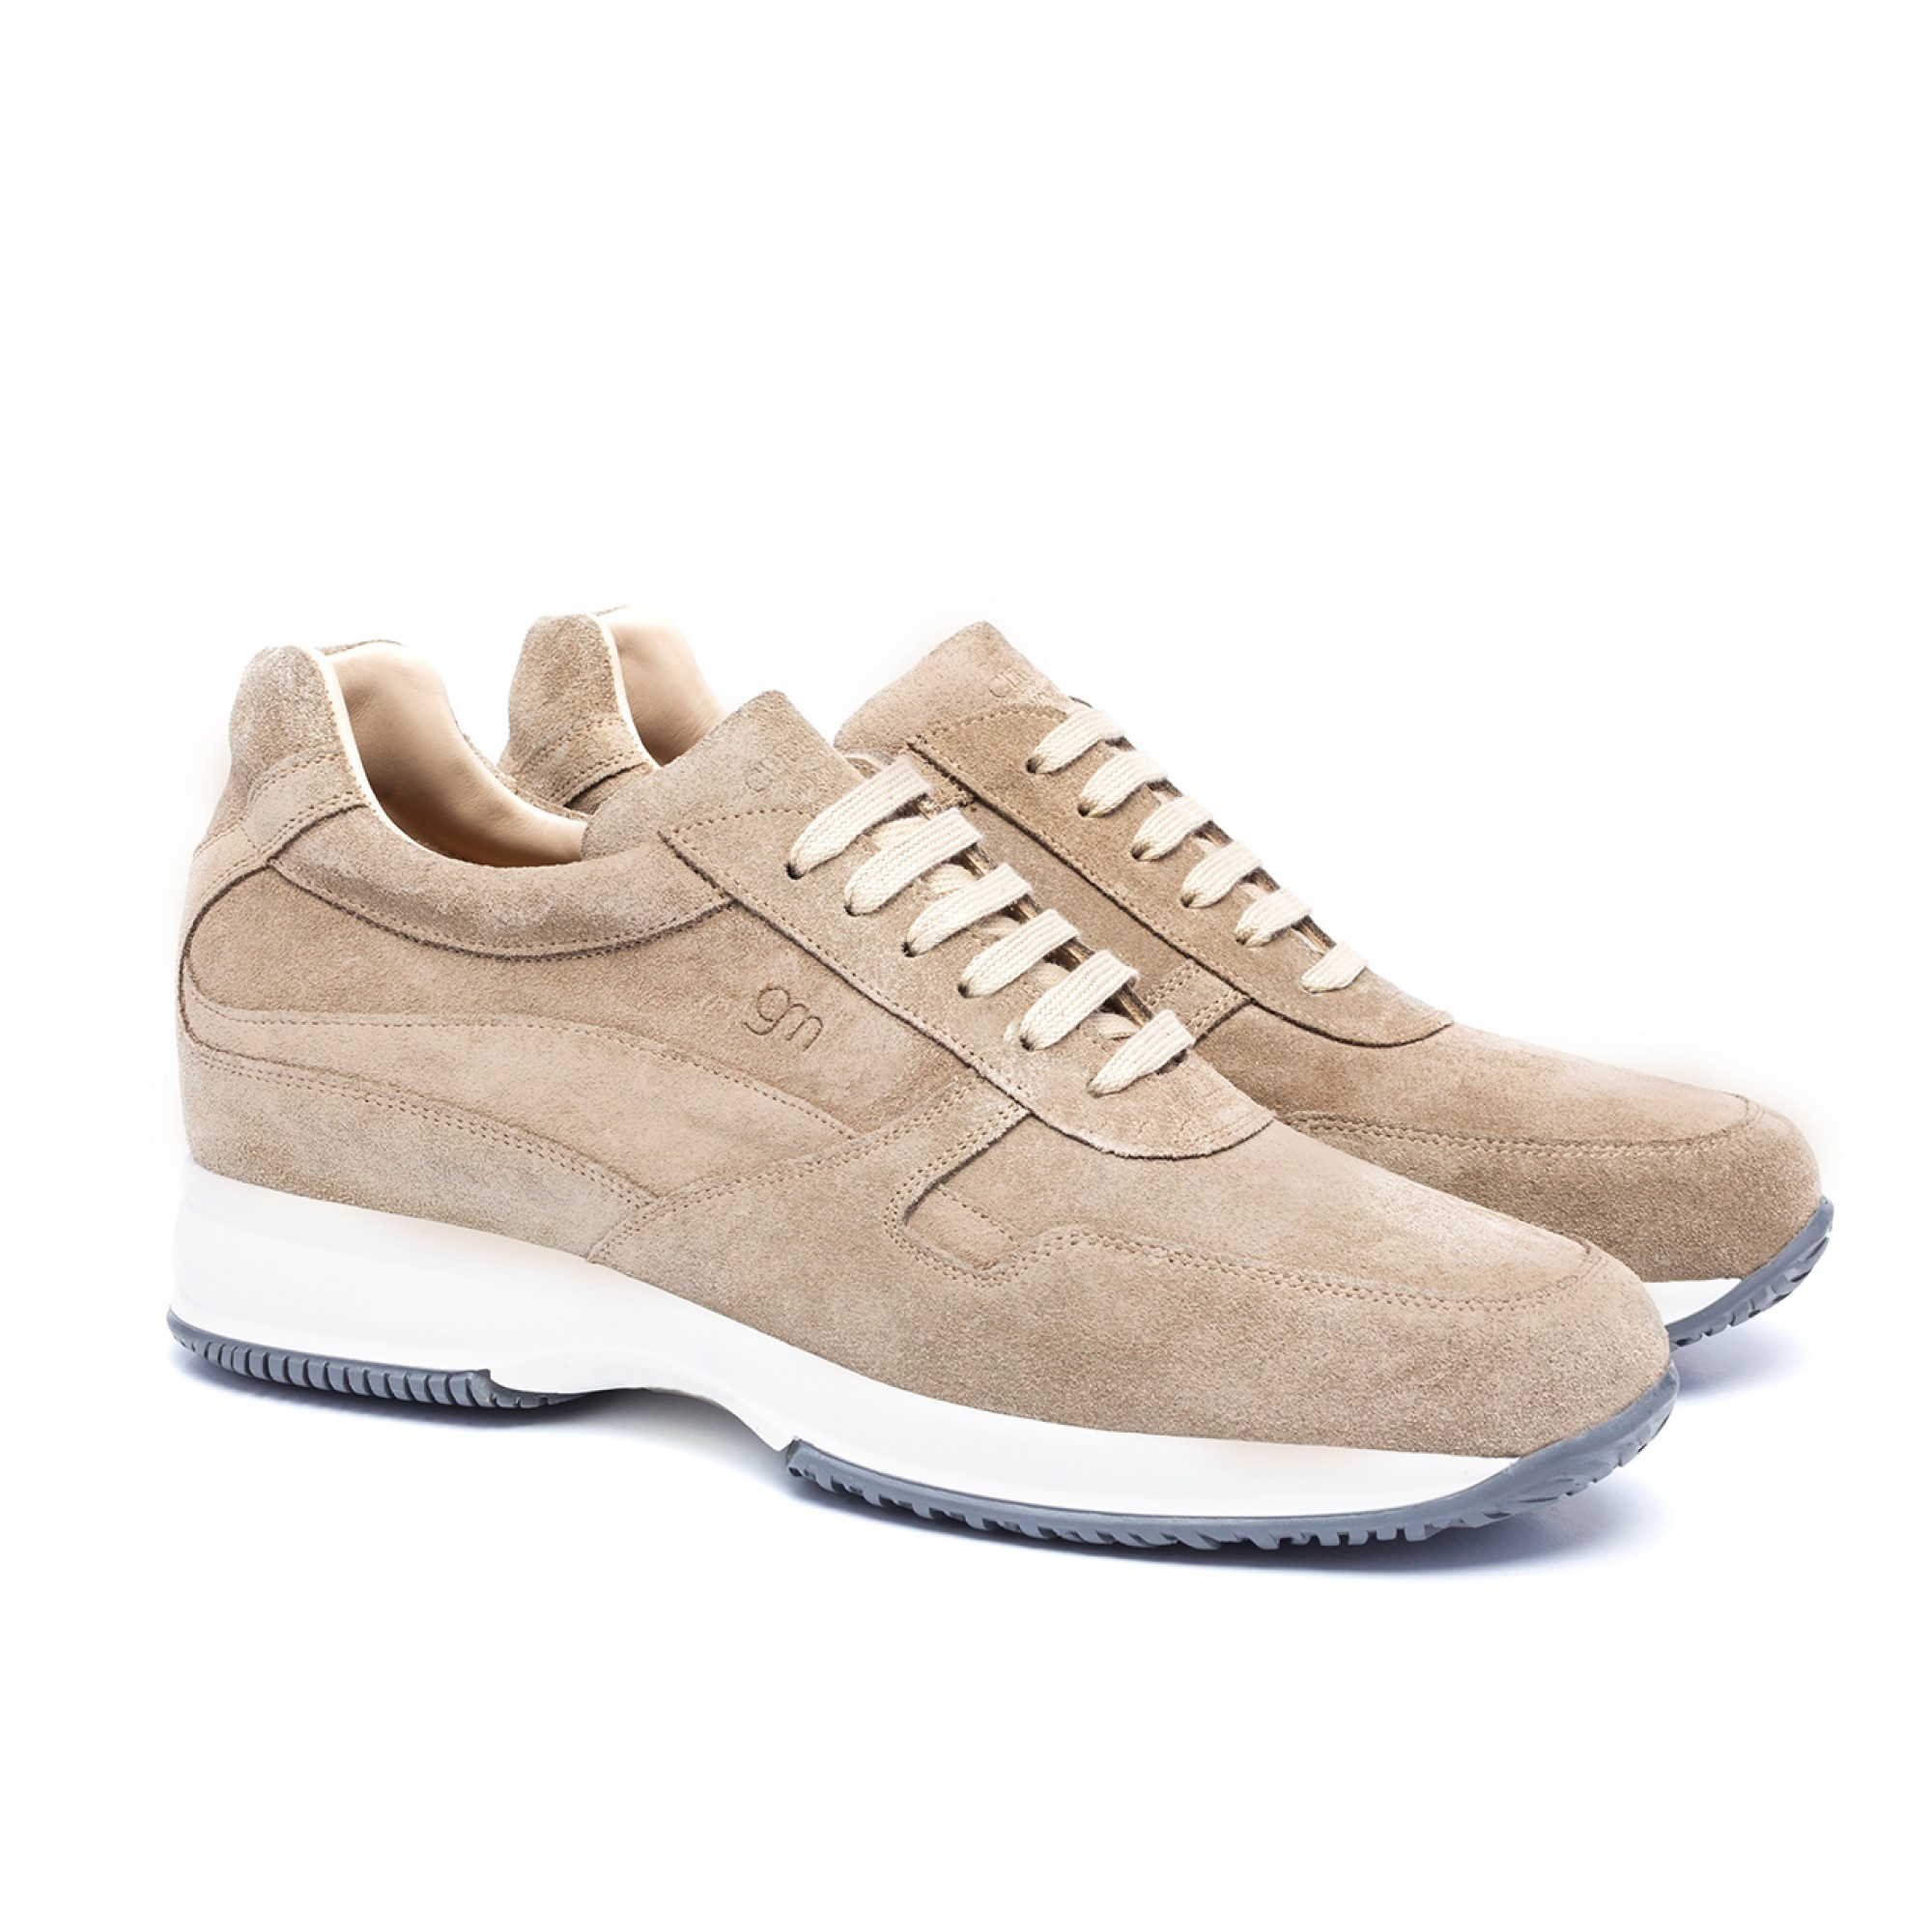 Rimini - Elevator Sneakers in Suede Leather from 2.4 to 4 inches